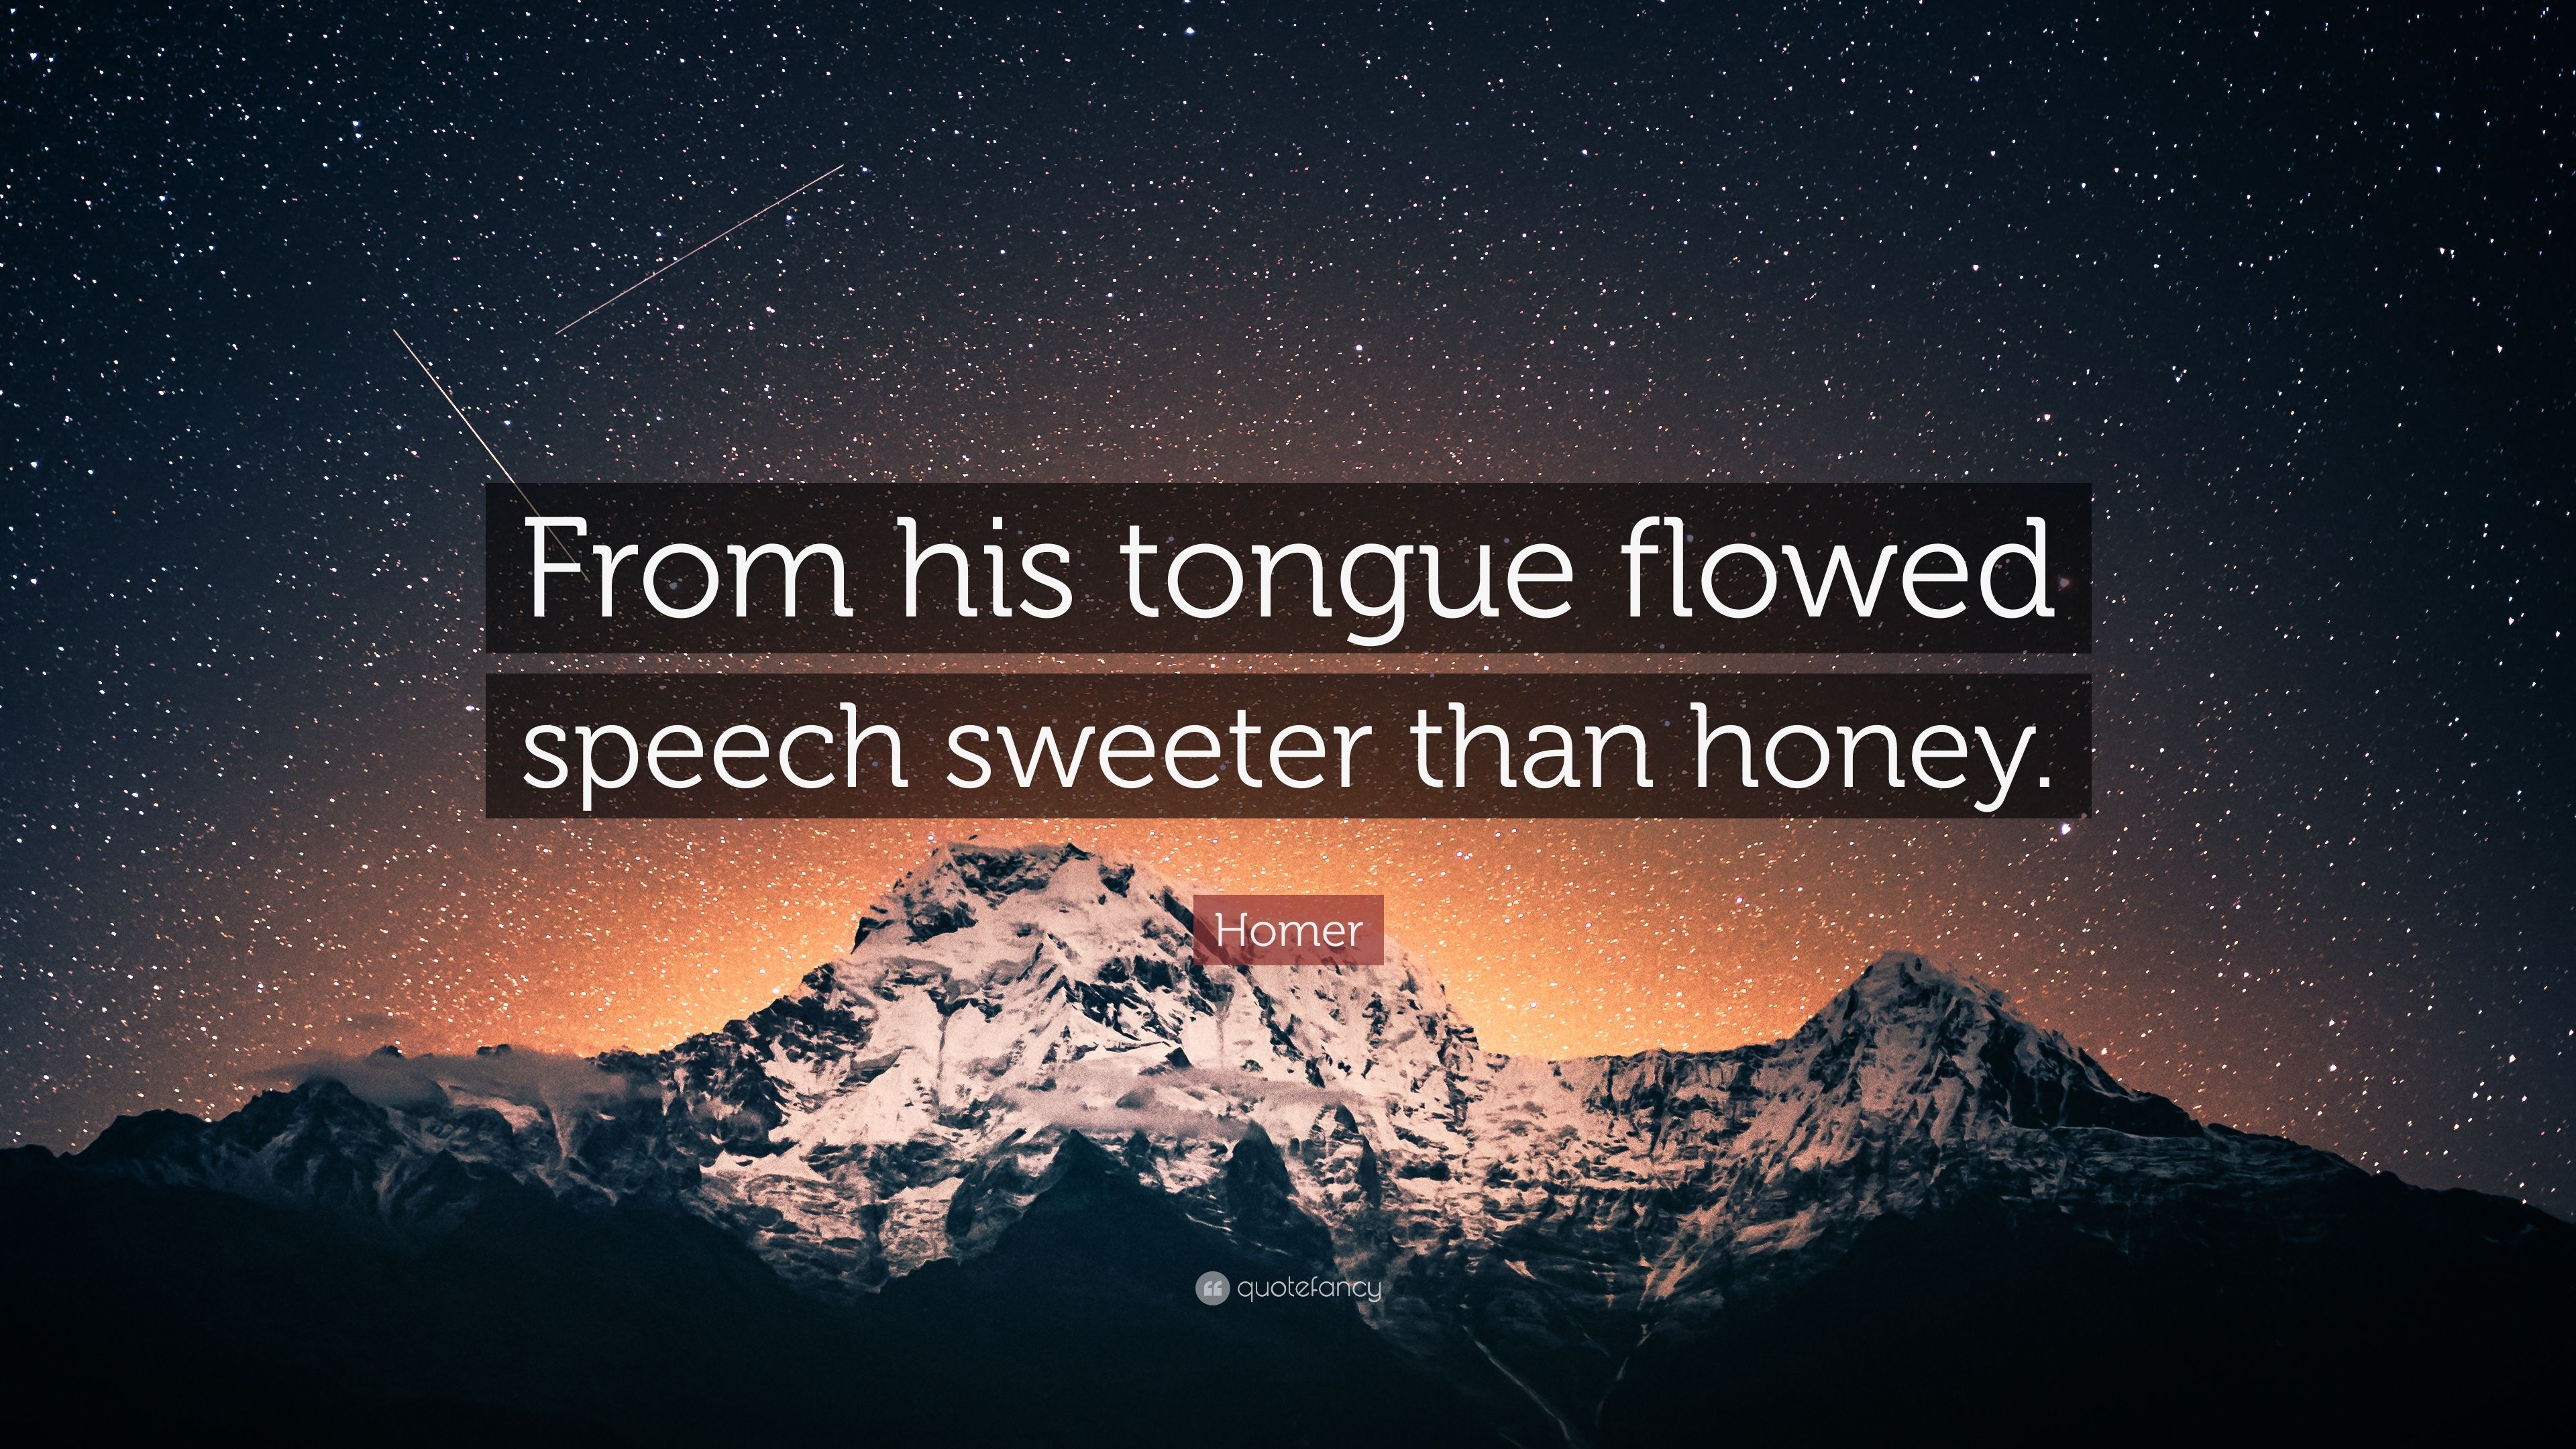 Homer Quote: “From his tongue flowed speech sweeter than honey